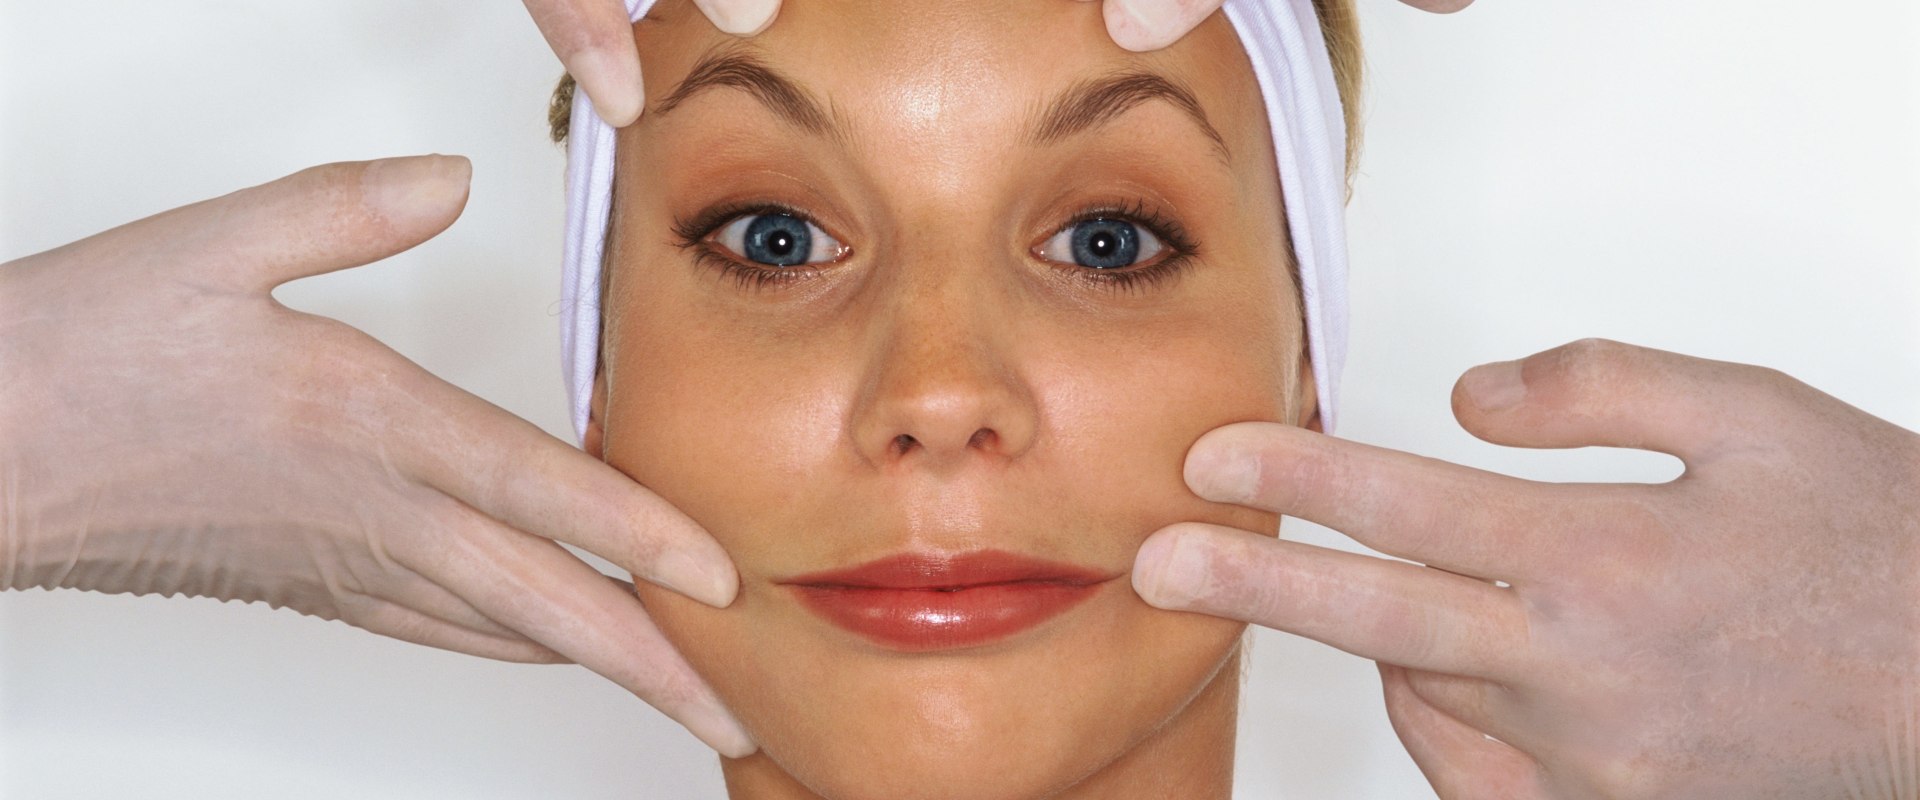 Which Country is the Best for Plastic Surgery?